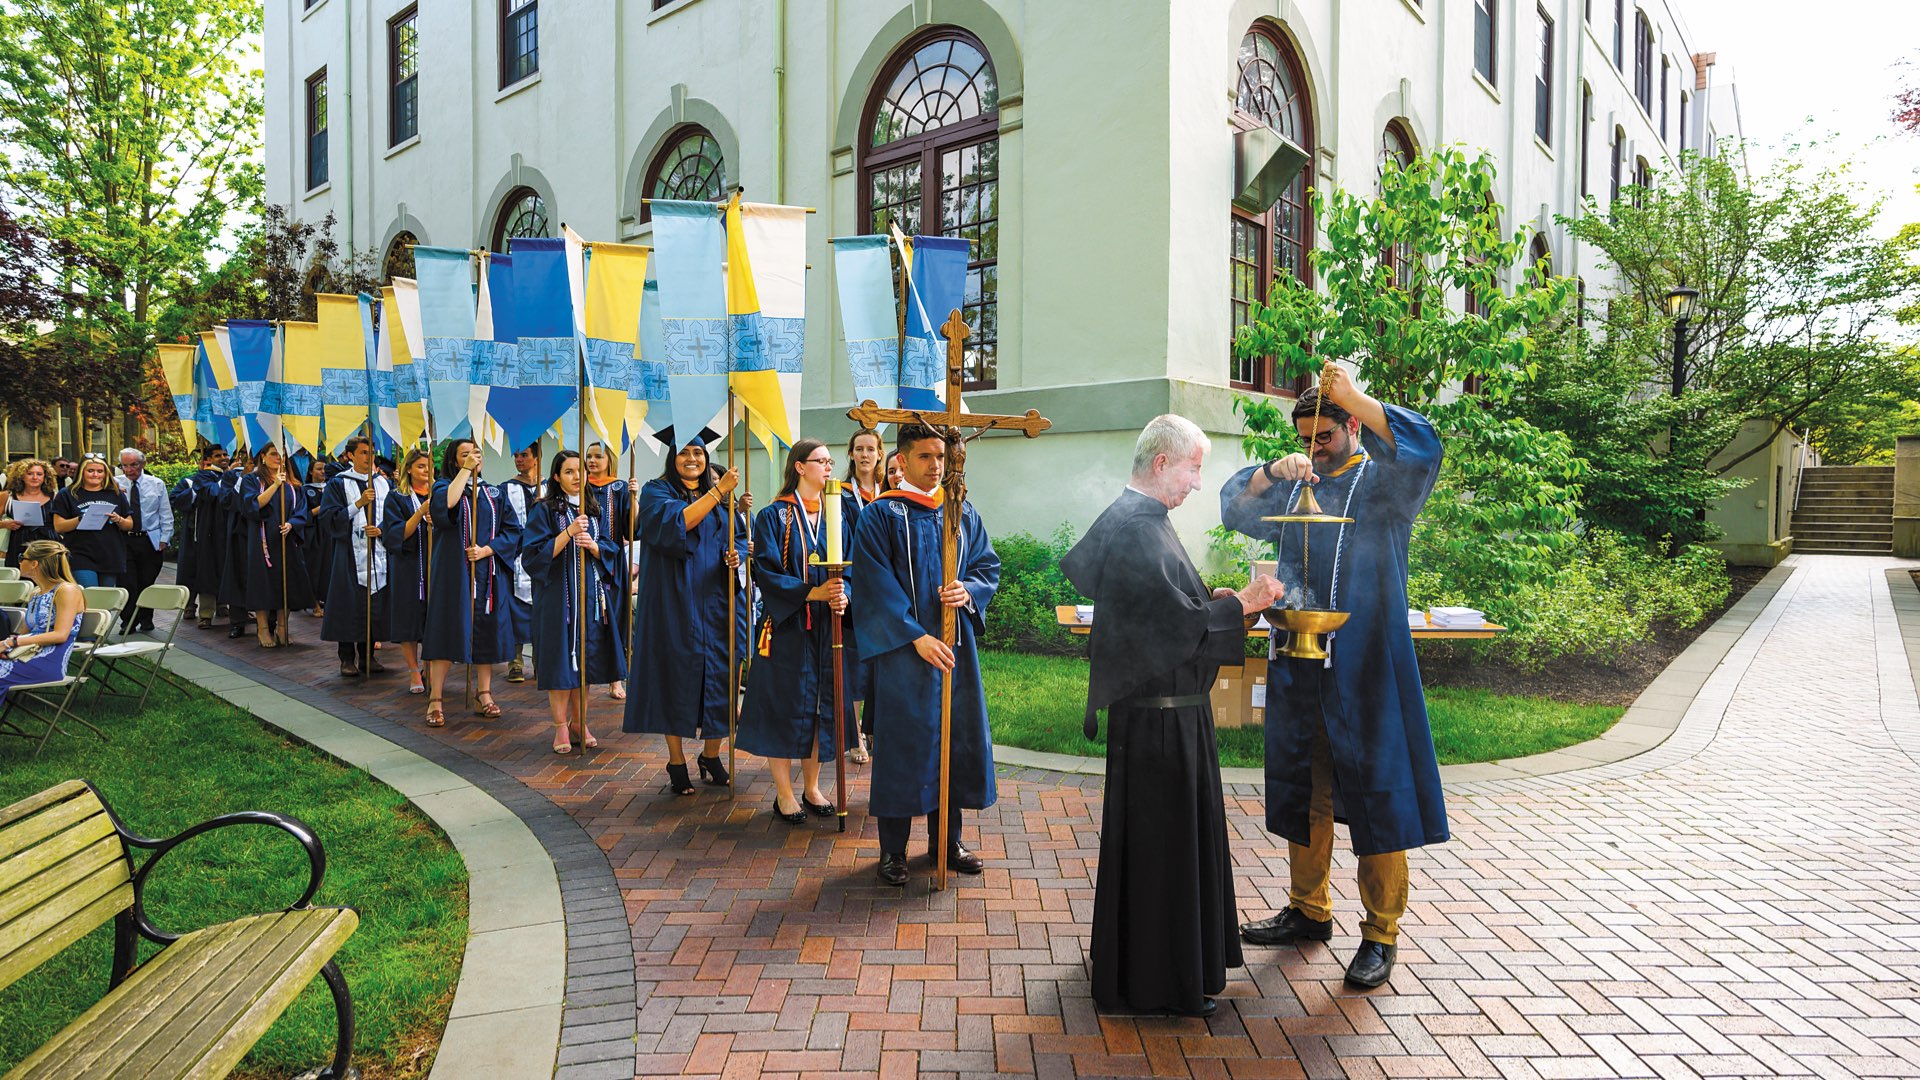 Students in graduation regalia holding banners line up for the Baccalaureate Mass procession on campus